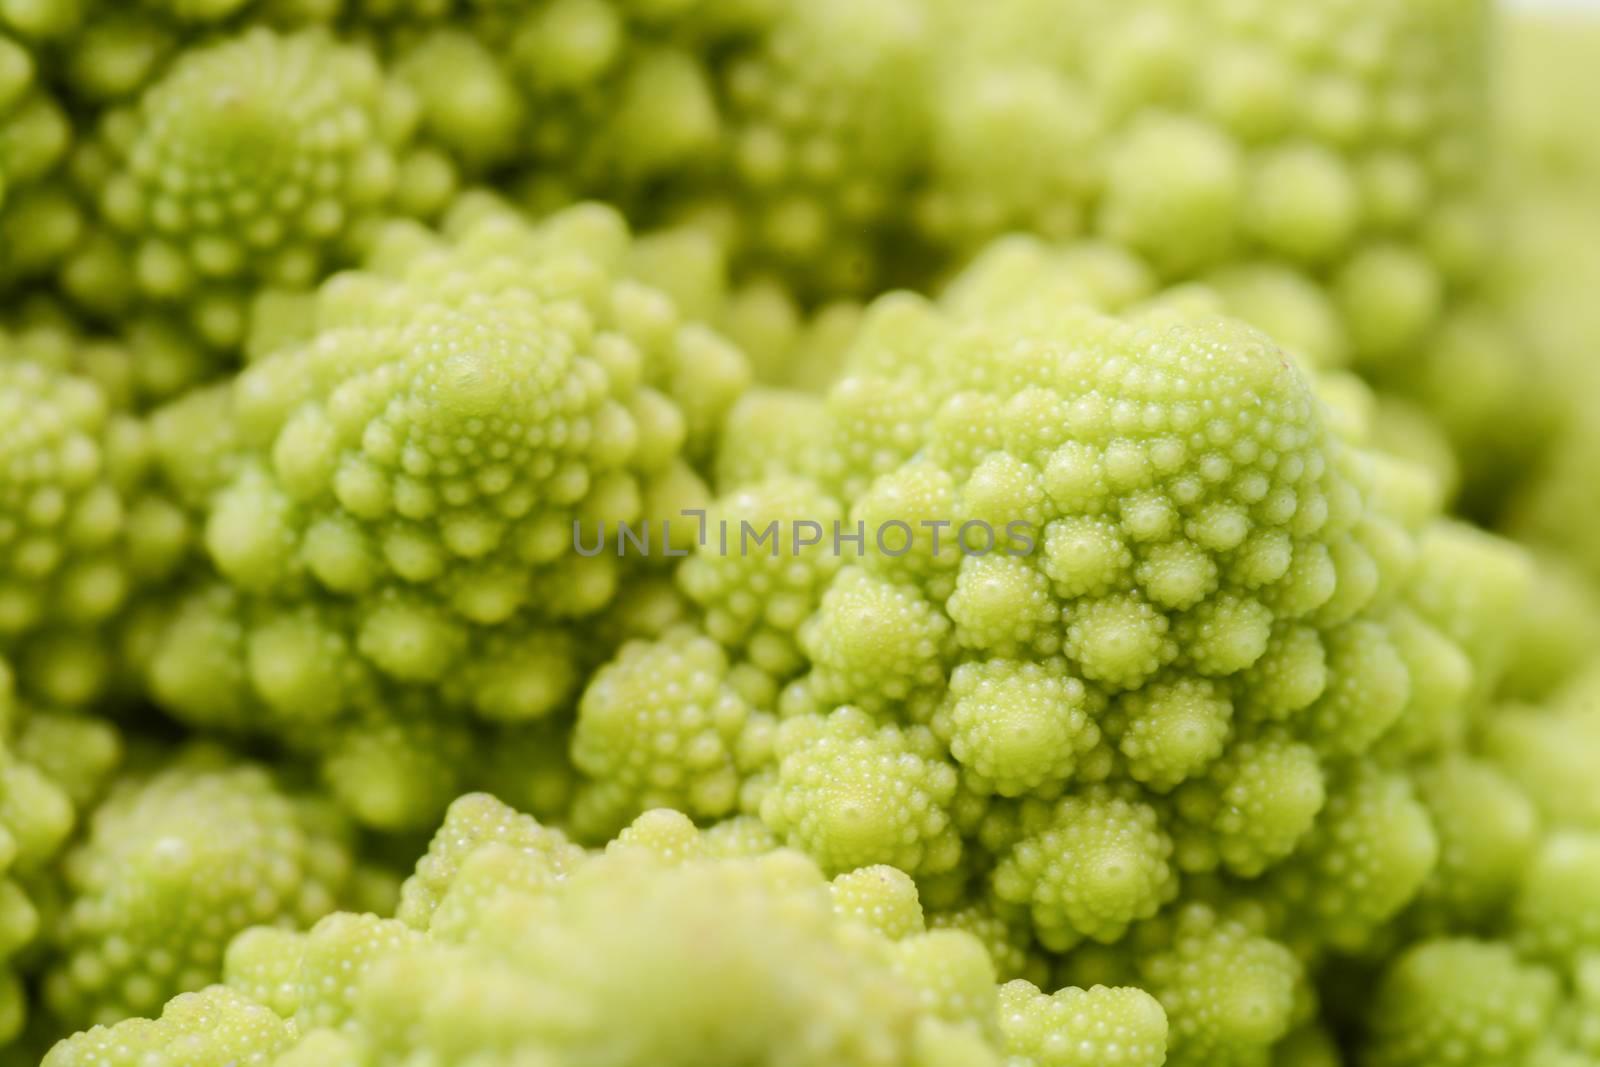 Roman cauliflower isolated on white background, it is an edible flower bud of the species Brassica oleracea. First documented in Italy, it is chartreuse in color.